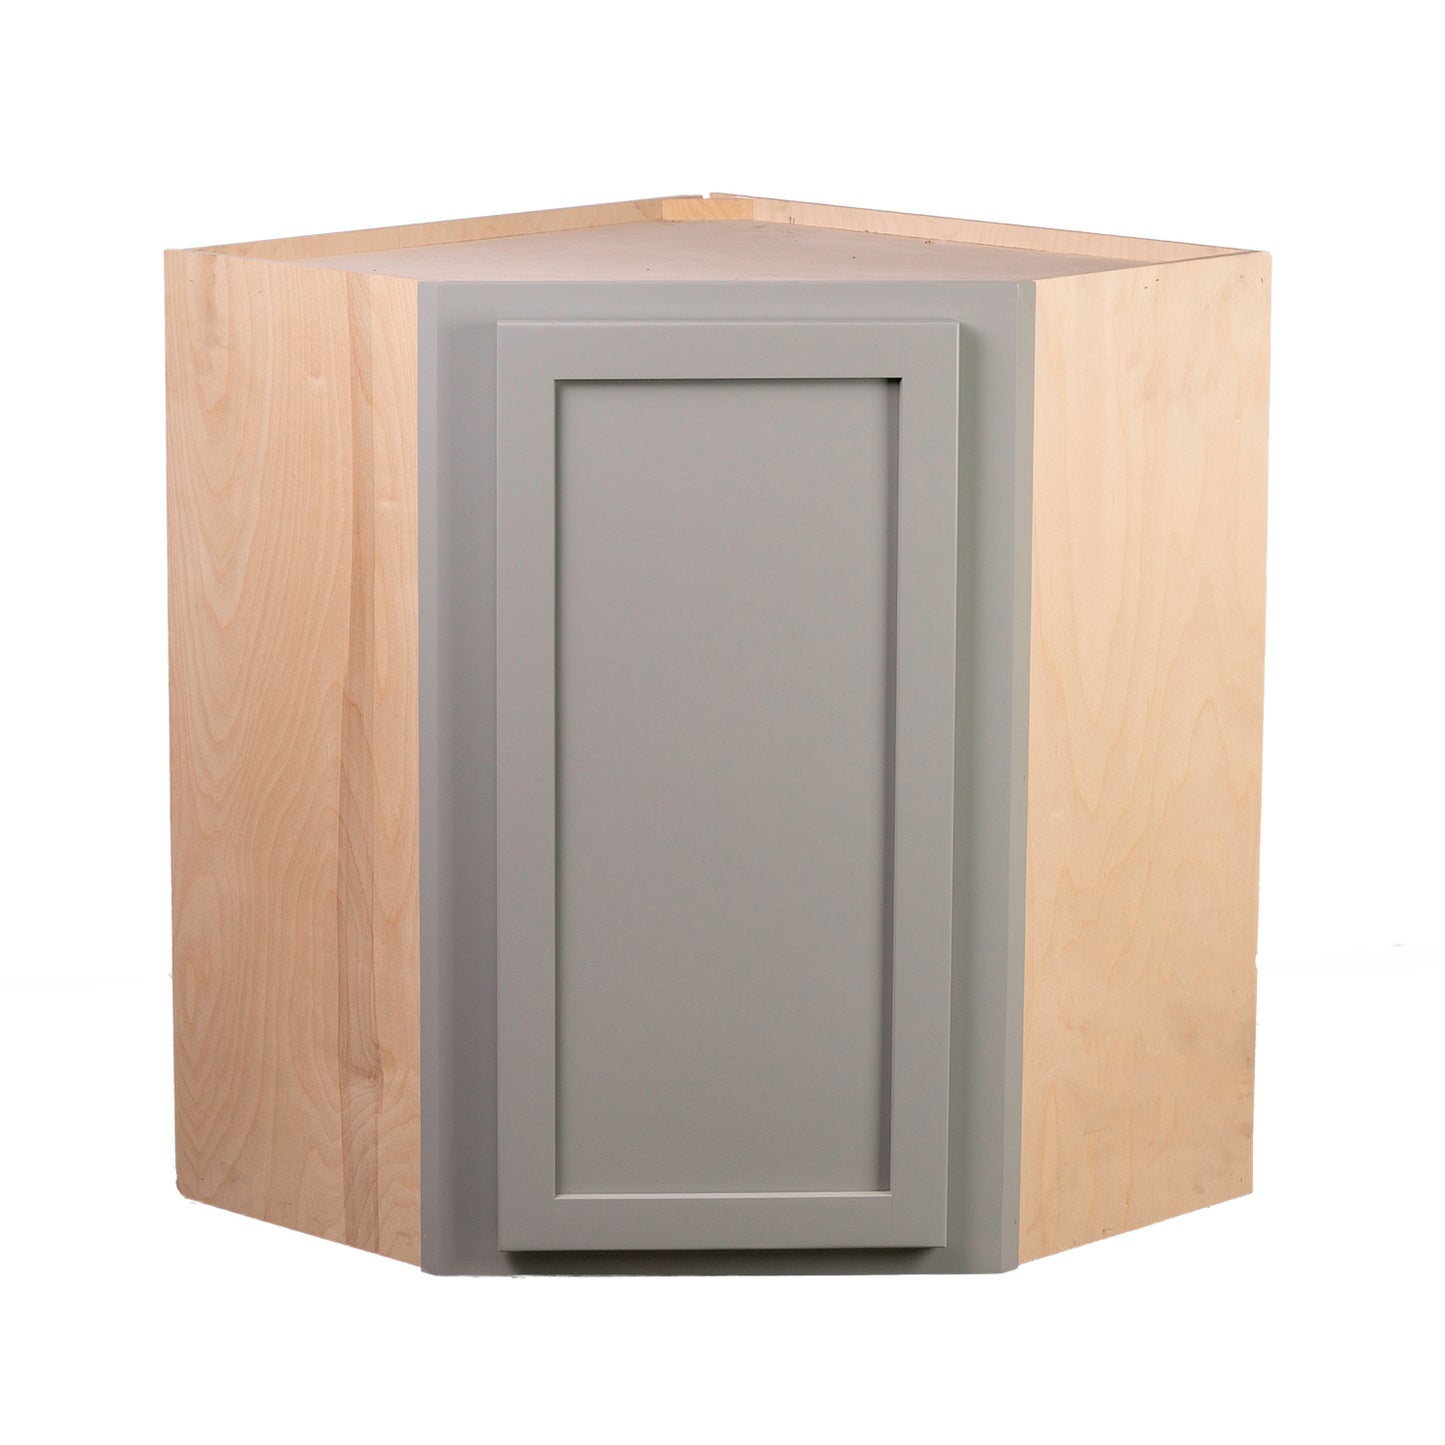 Quicklock RTA (Ready-to-Assemble) Magnetic Gray Wall Corner Cabinet- 24"W x (30" or 36"H)